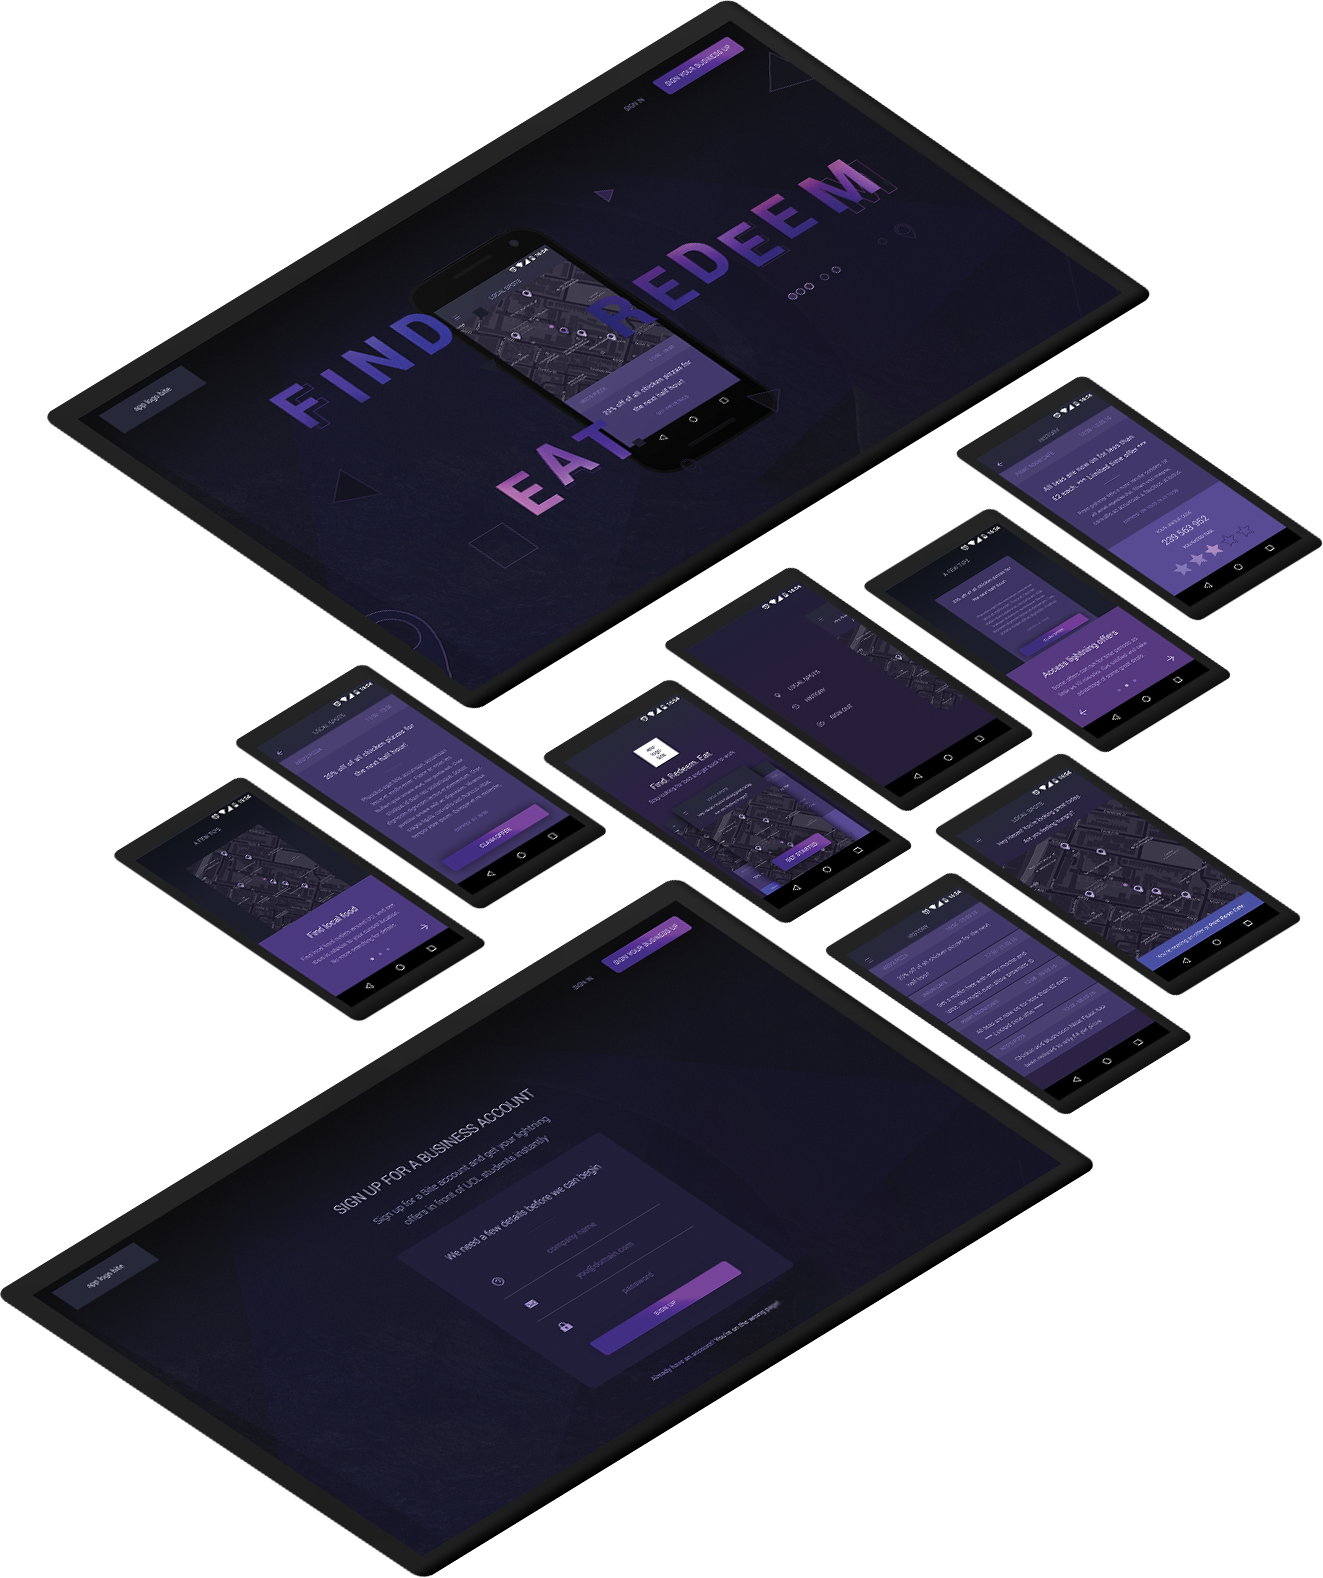 The entire Bit app and website ecosystem